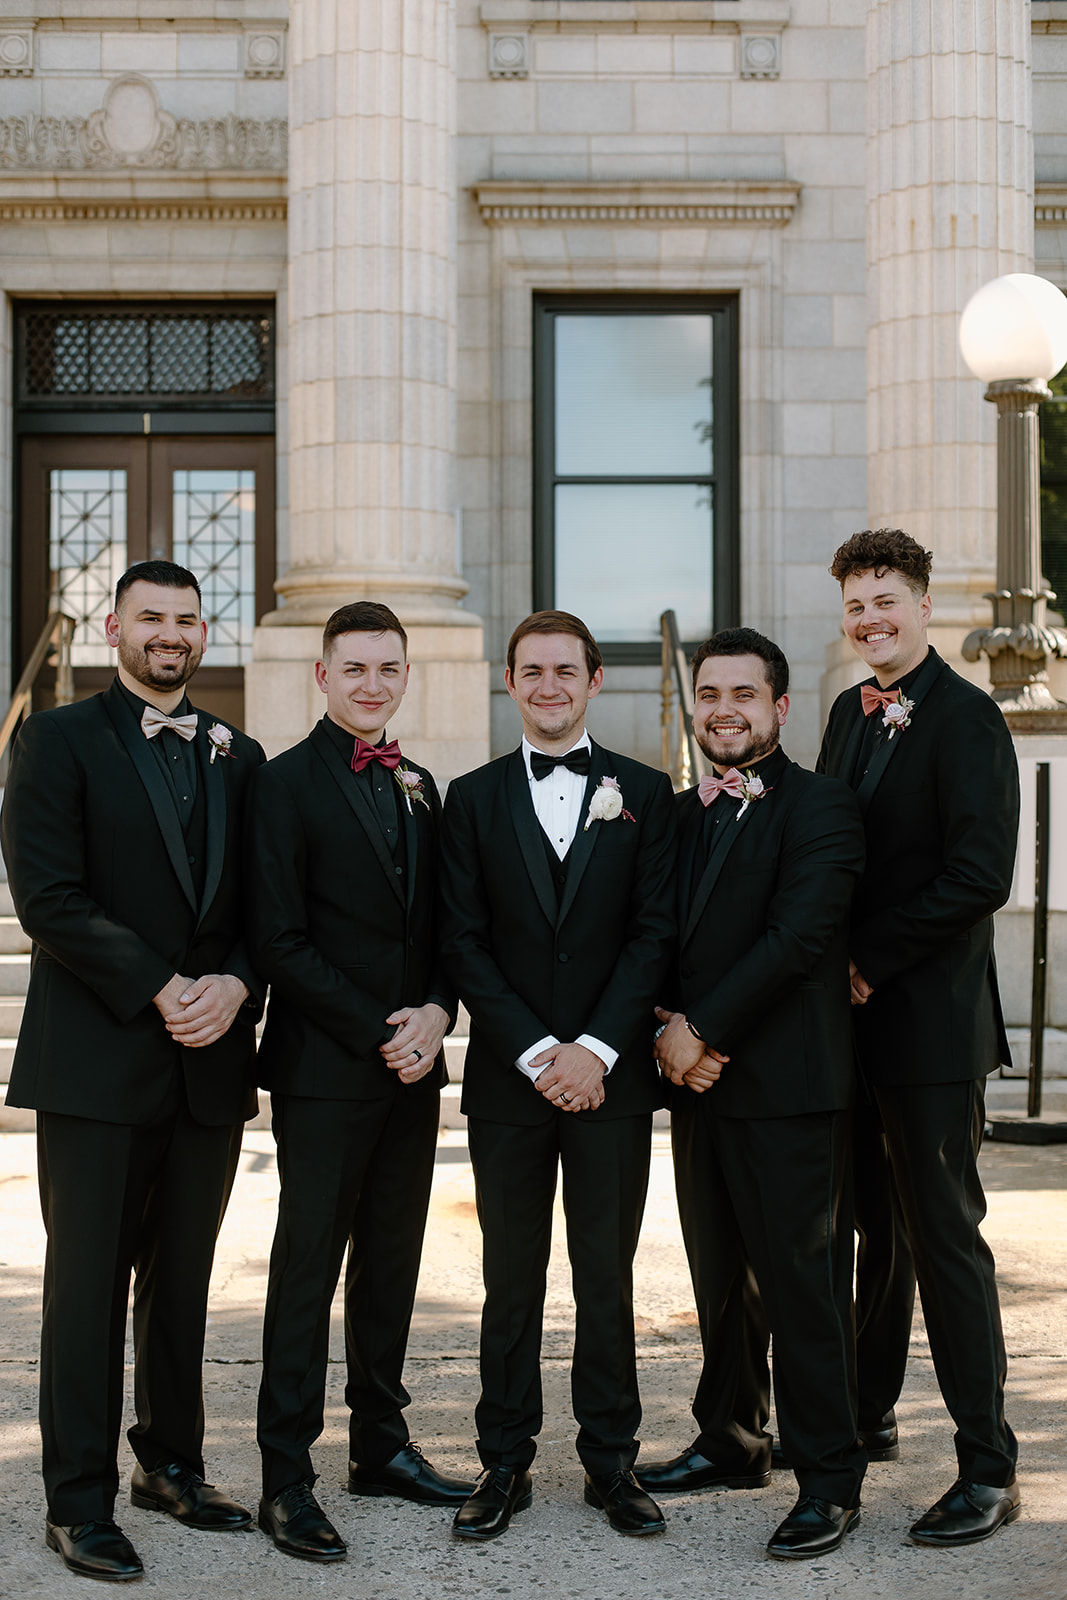 Courthouse bridal party photos near The Graham Mill in North Carolina by Raleigh Wedding Photographers and Videographers